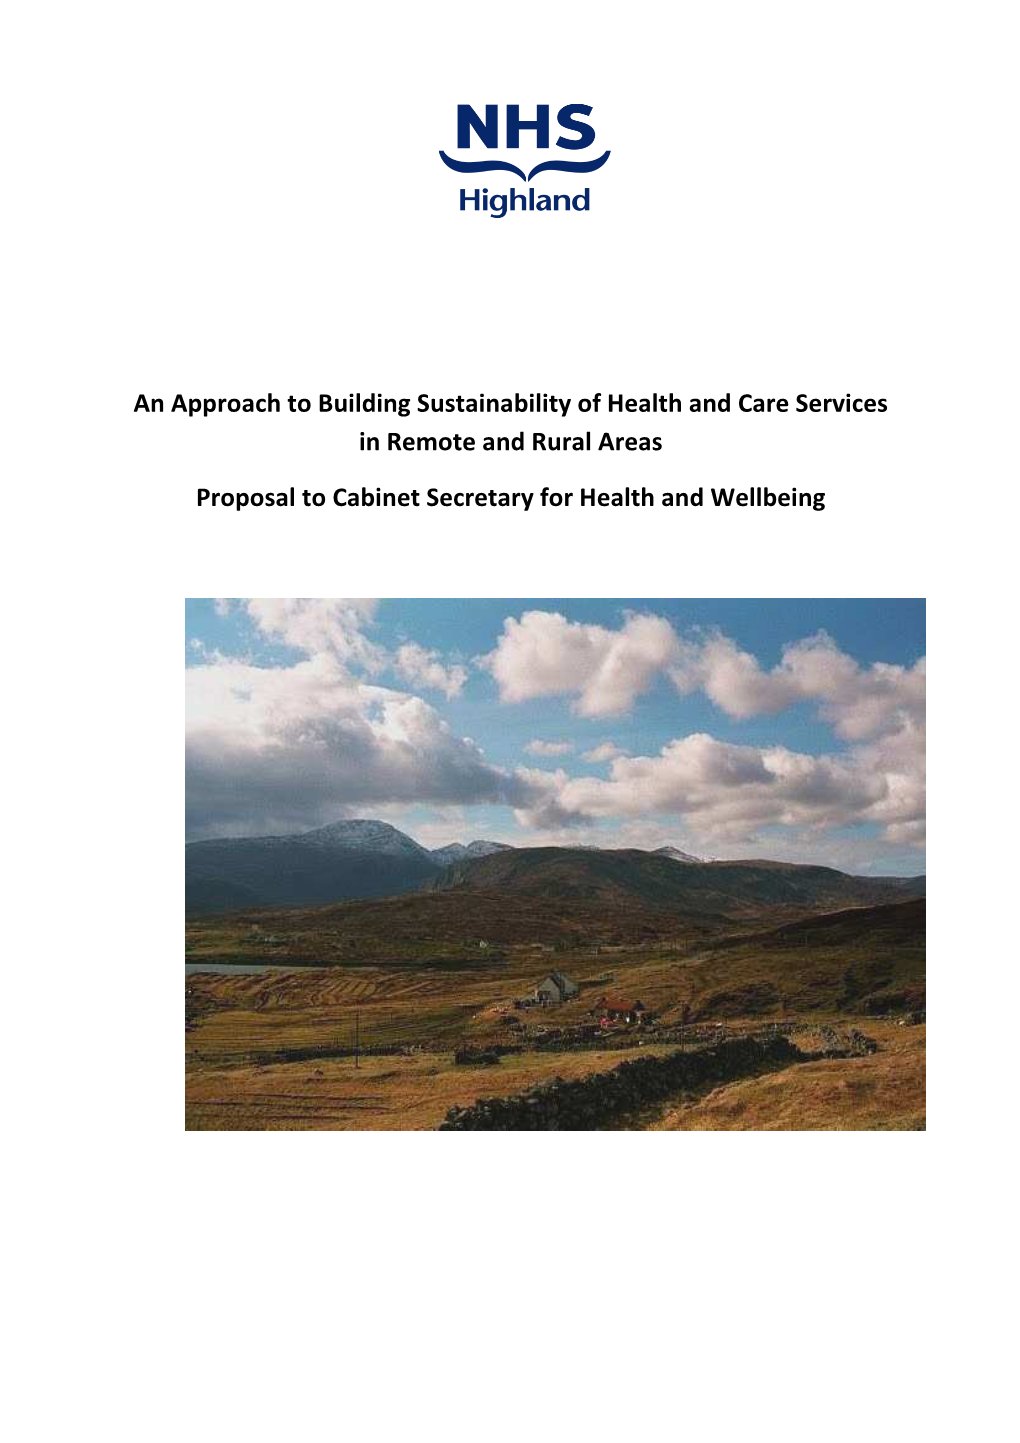 An Approach to Building Sustainability of Health and Care Services in Remote and Rural Areas